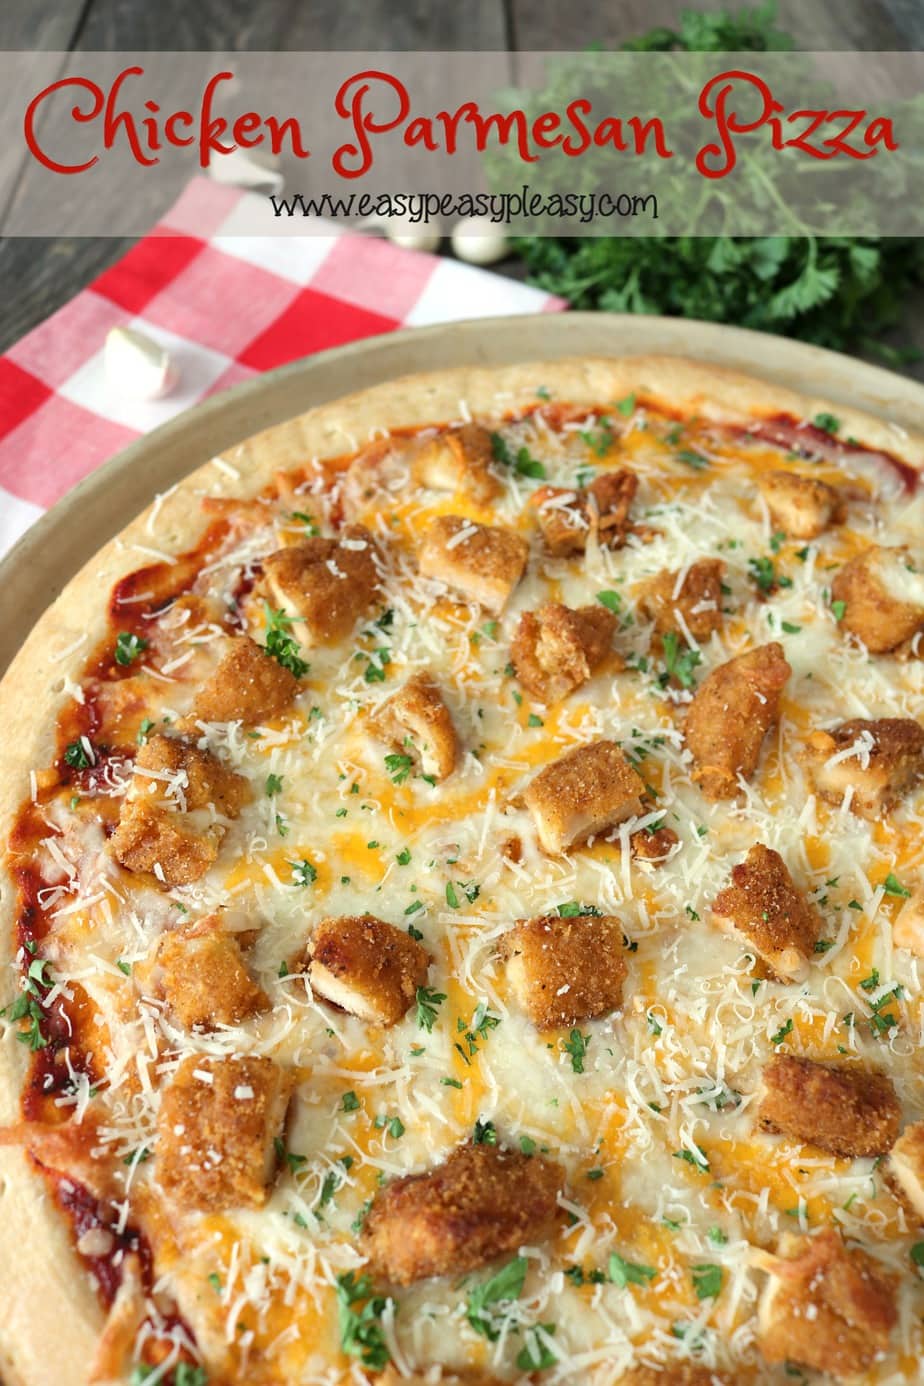 Make an easy pizza your kids will love using my take on a traditional chicken parmesan recipe.